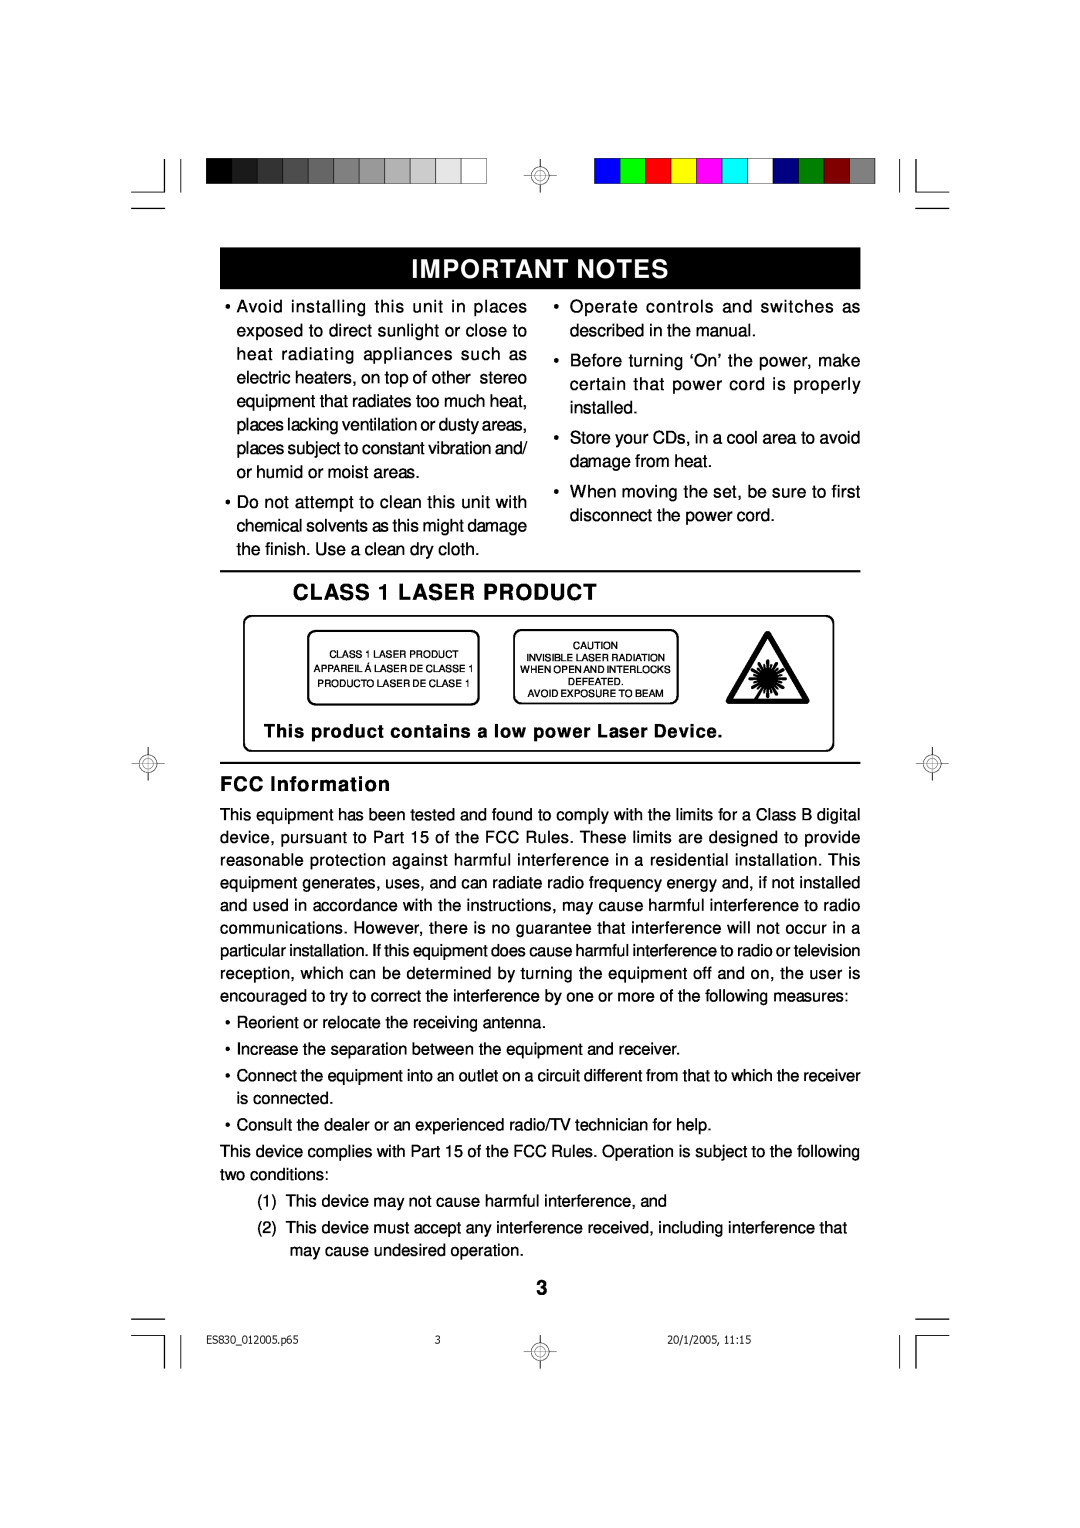 Emerson ES830 owner manual Important Notes, CLASS 1 LASER PRODUCT, FCC Information 